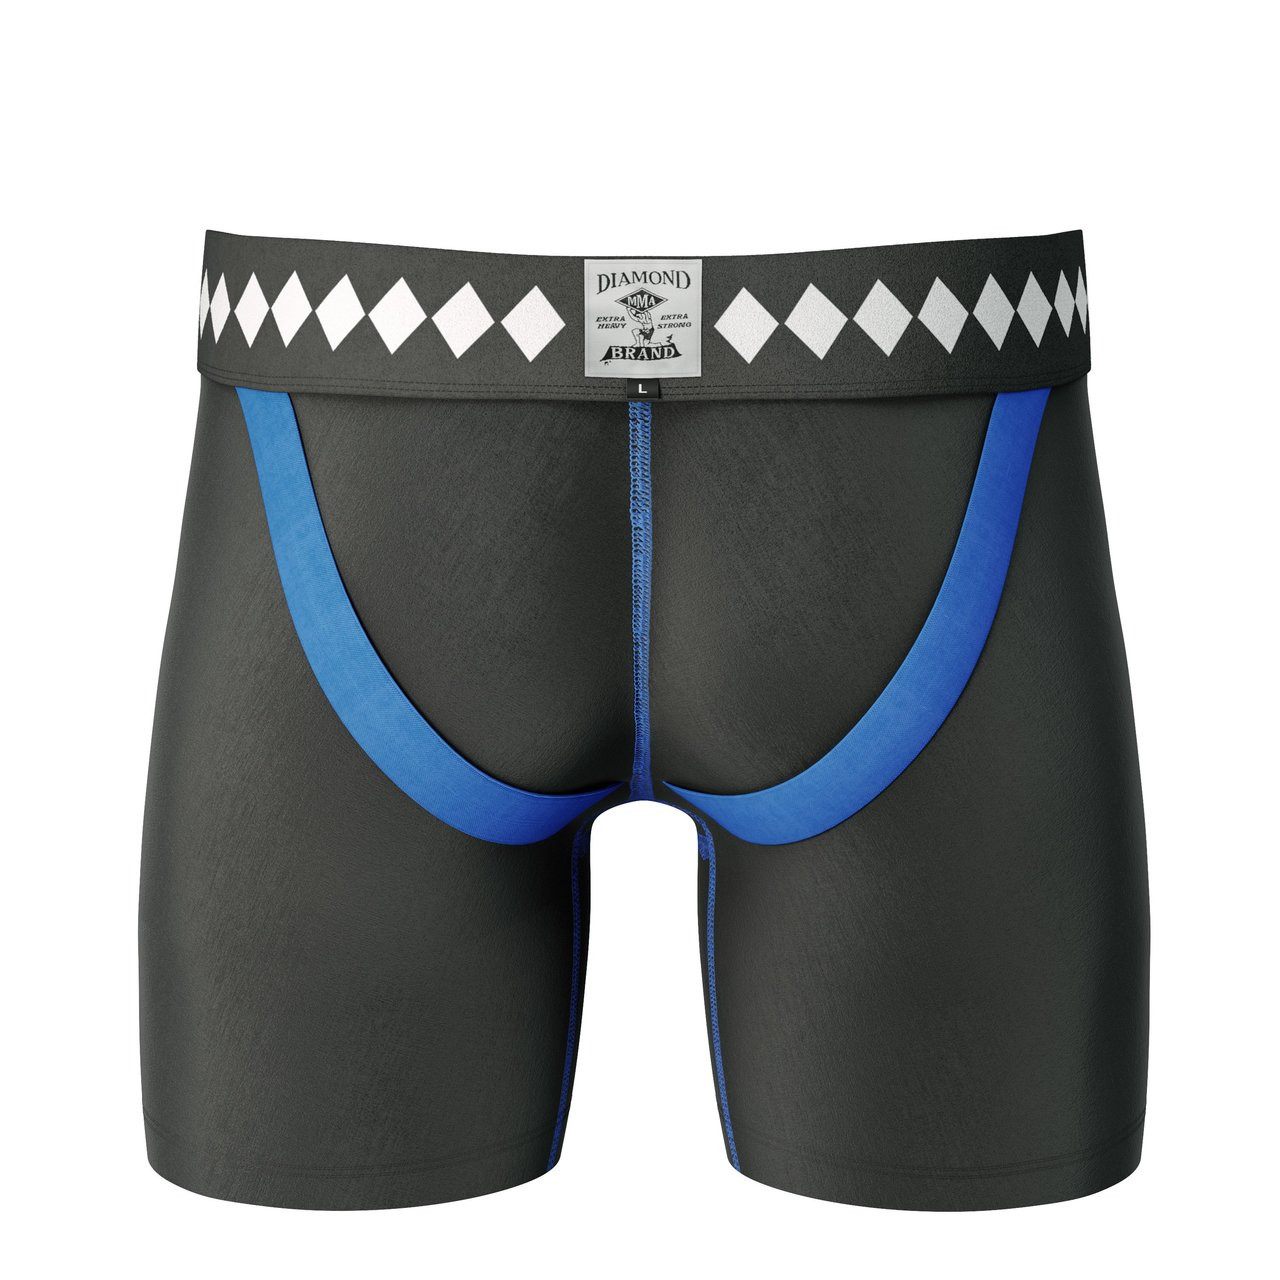 Black/Blue Diamond MMA Compression Shorts with Groin Protection Cup System